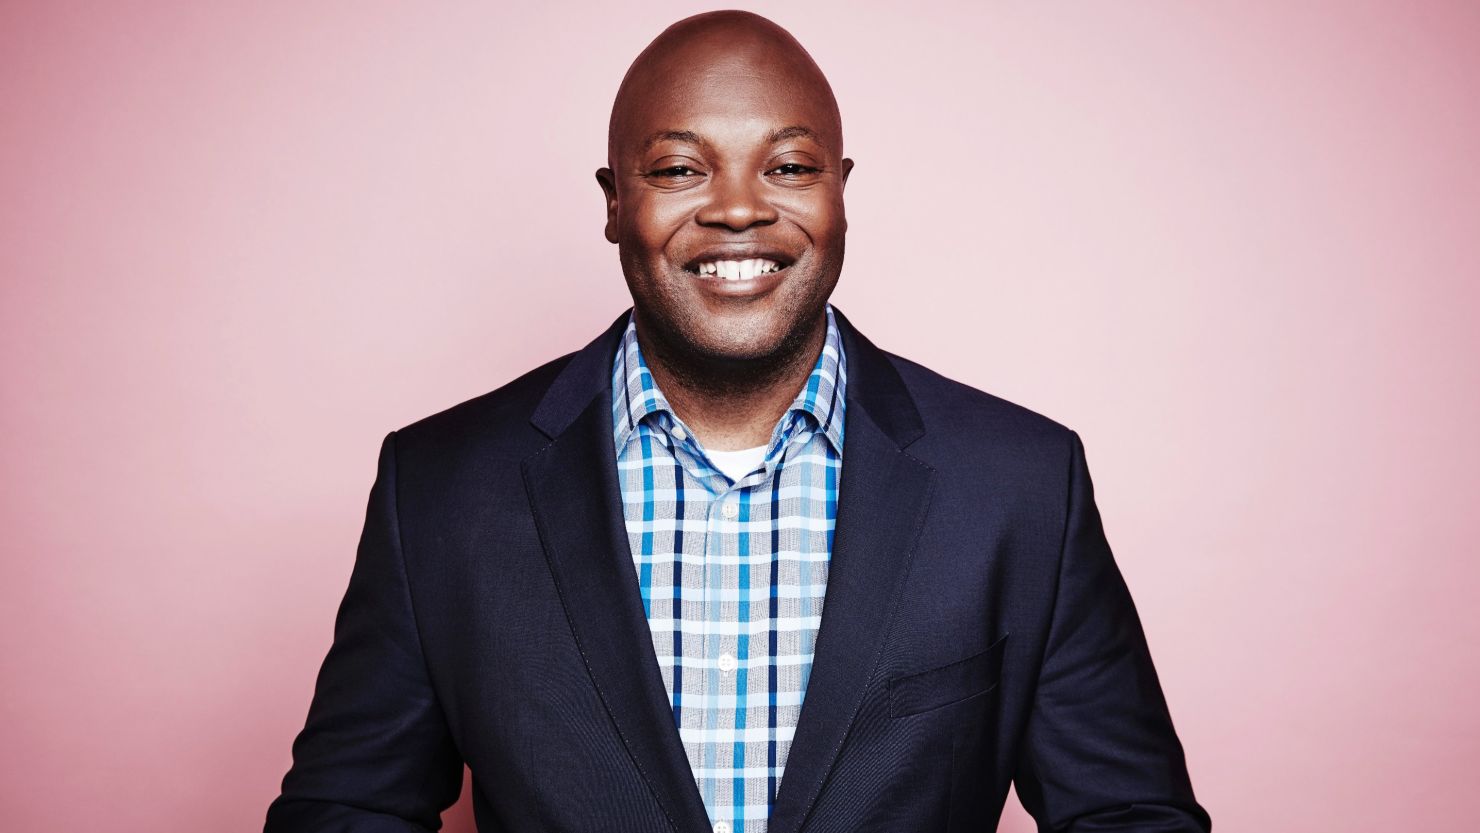 Cheo Coker from Netflix's 'Luke Cage' poses for a portrait during the 2016 Television Critics Association Summer Tour at The Beverly Hilton Hotel on July 27, 2016 in Beverly Hills, California.